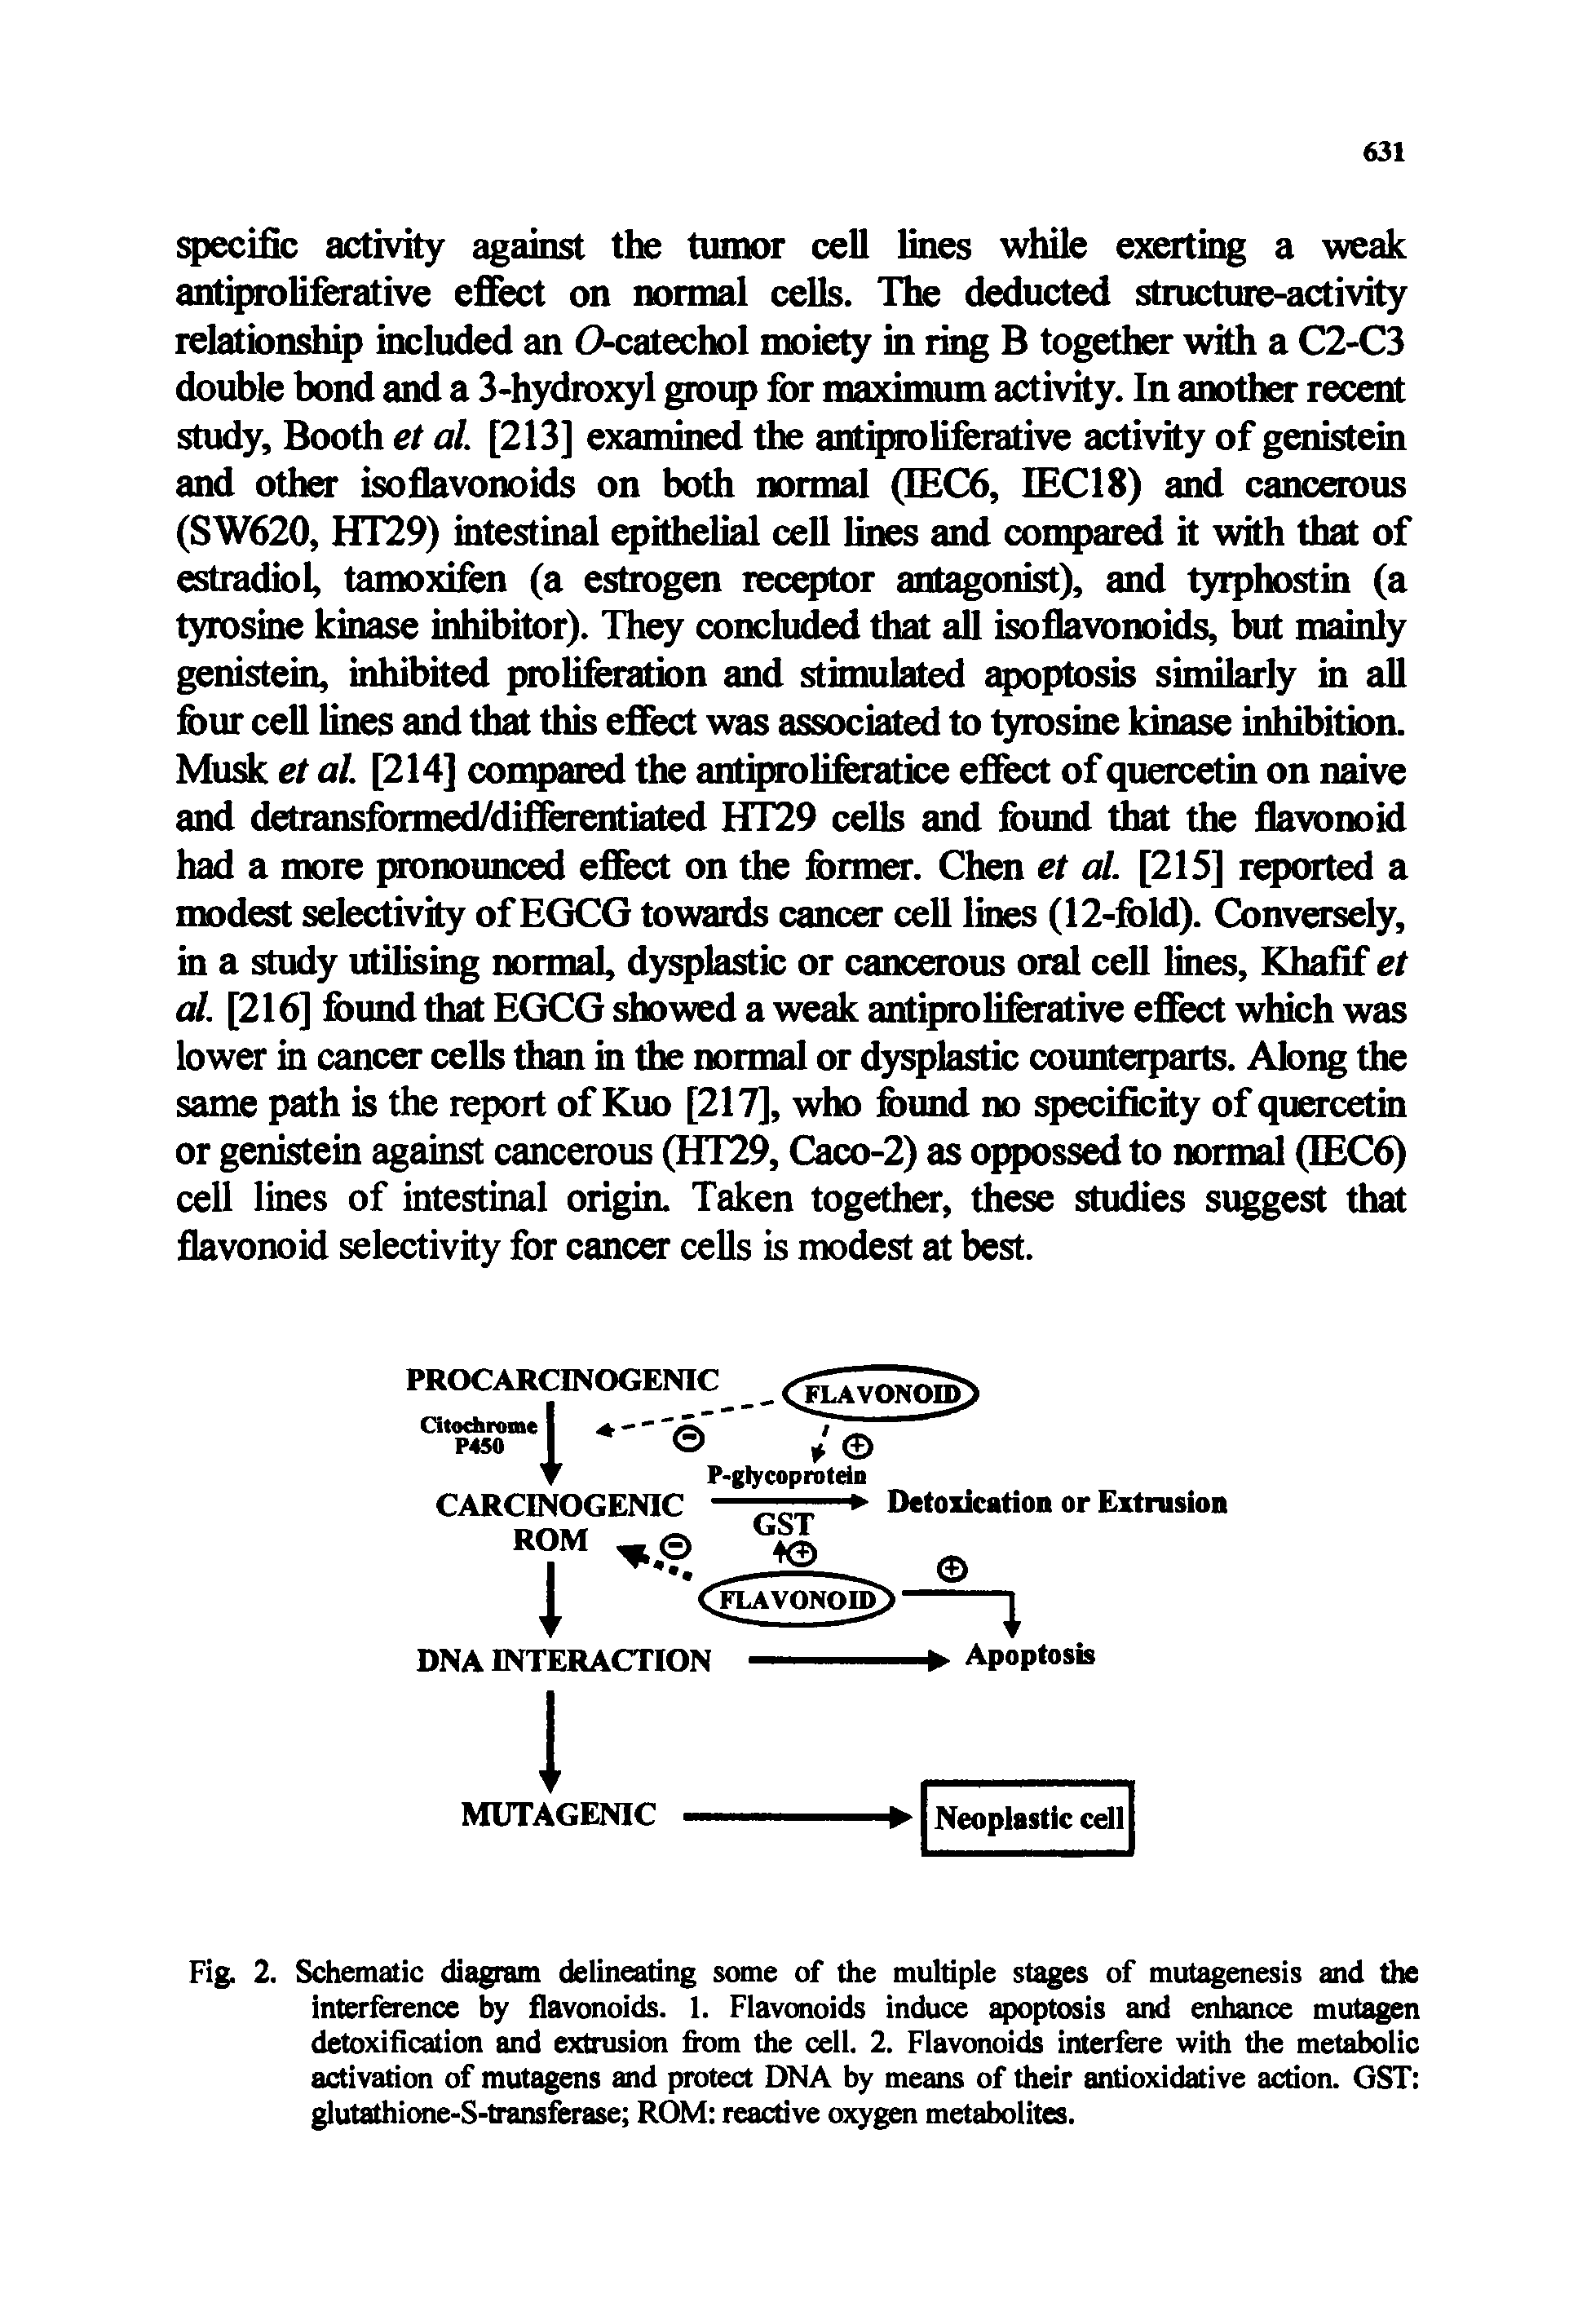 Fig. 2. Schematic diagram delineating some of the multiple stages of mutagenesis and the interference by flavonoids. 1. Flavonoids induce apoptosis and enhance mutagen detoxification and extrusion from the cell. 2. Flavonoids interfere with the metabolic activation of mutagens and protect DNA by means of their antioxidative action. GST glutathione-S-transferase ROM reactive oxygen metabolites.